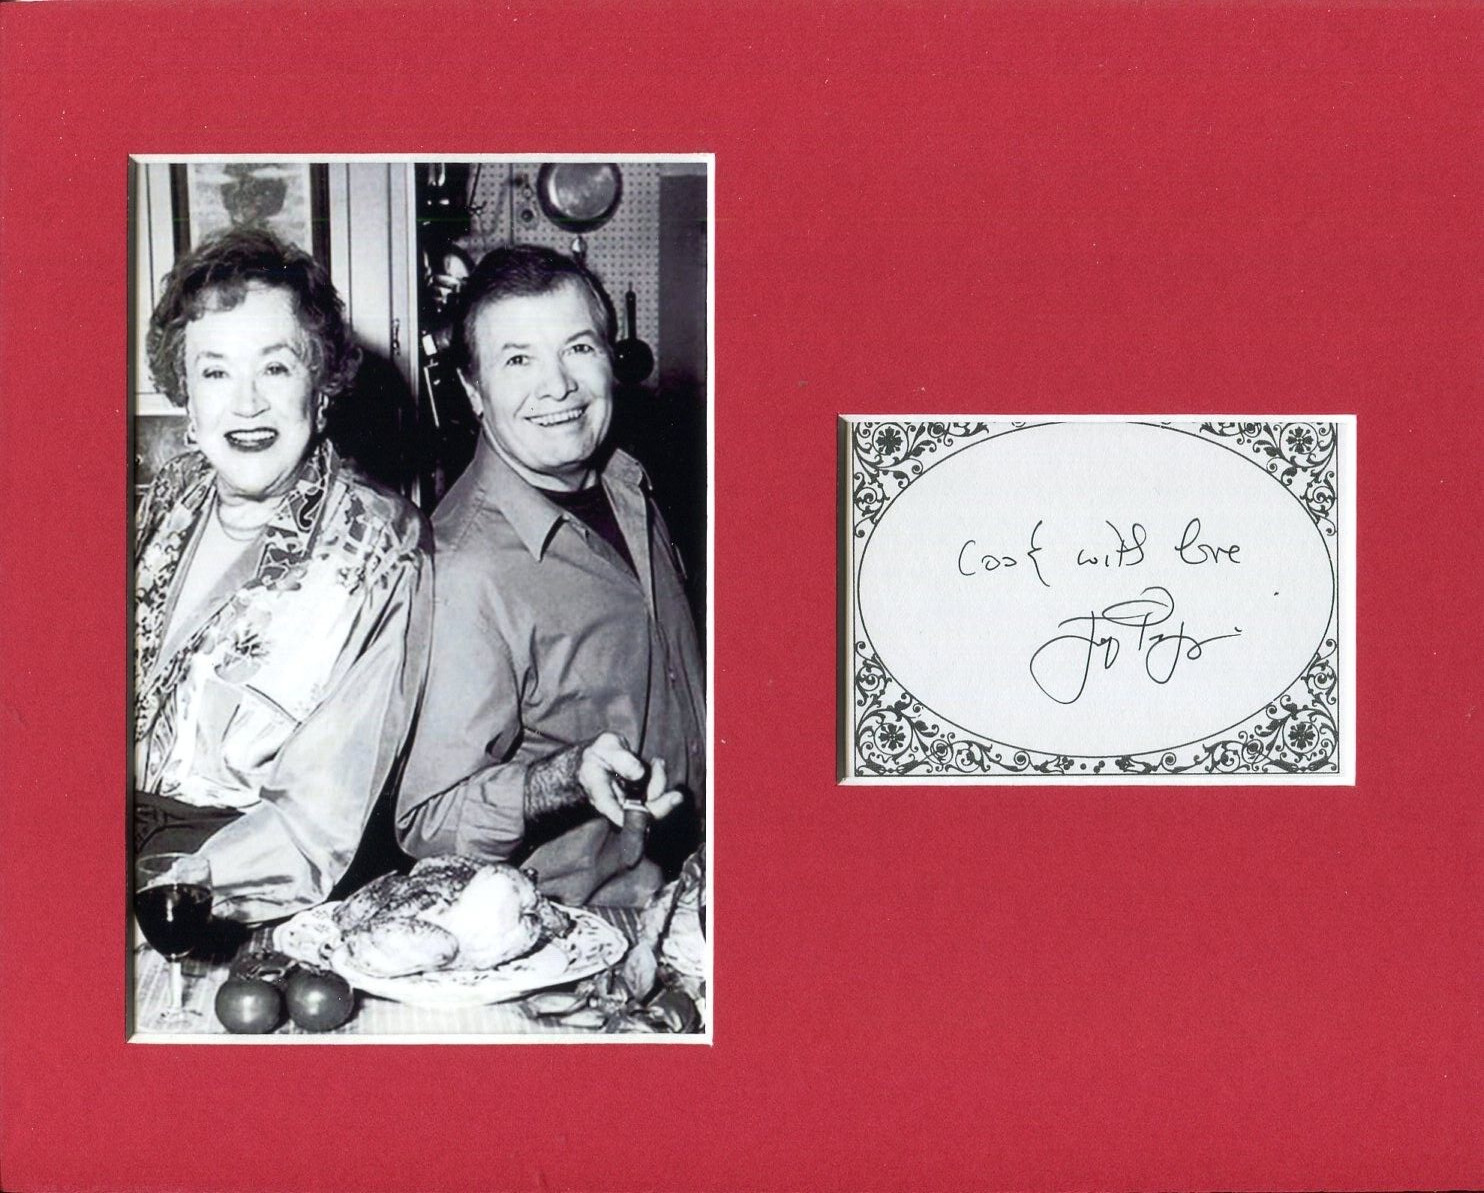 Jacques Pepin Famous French Chef Signed Autograph Photo Display W/ Julia Child